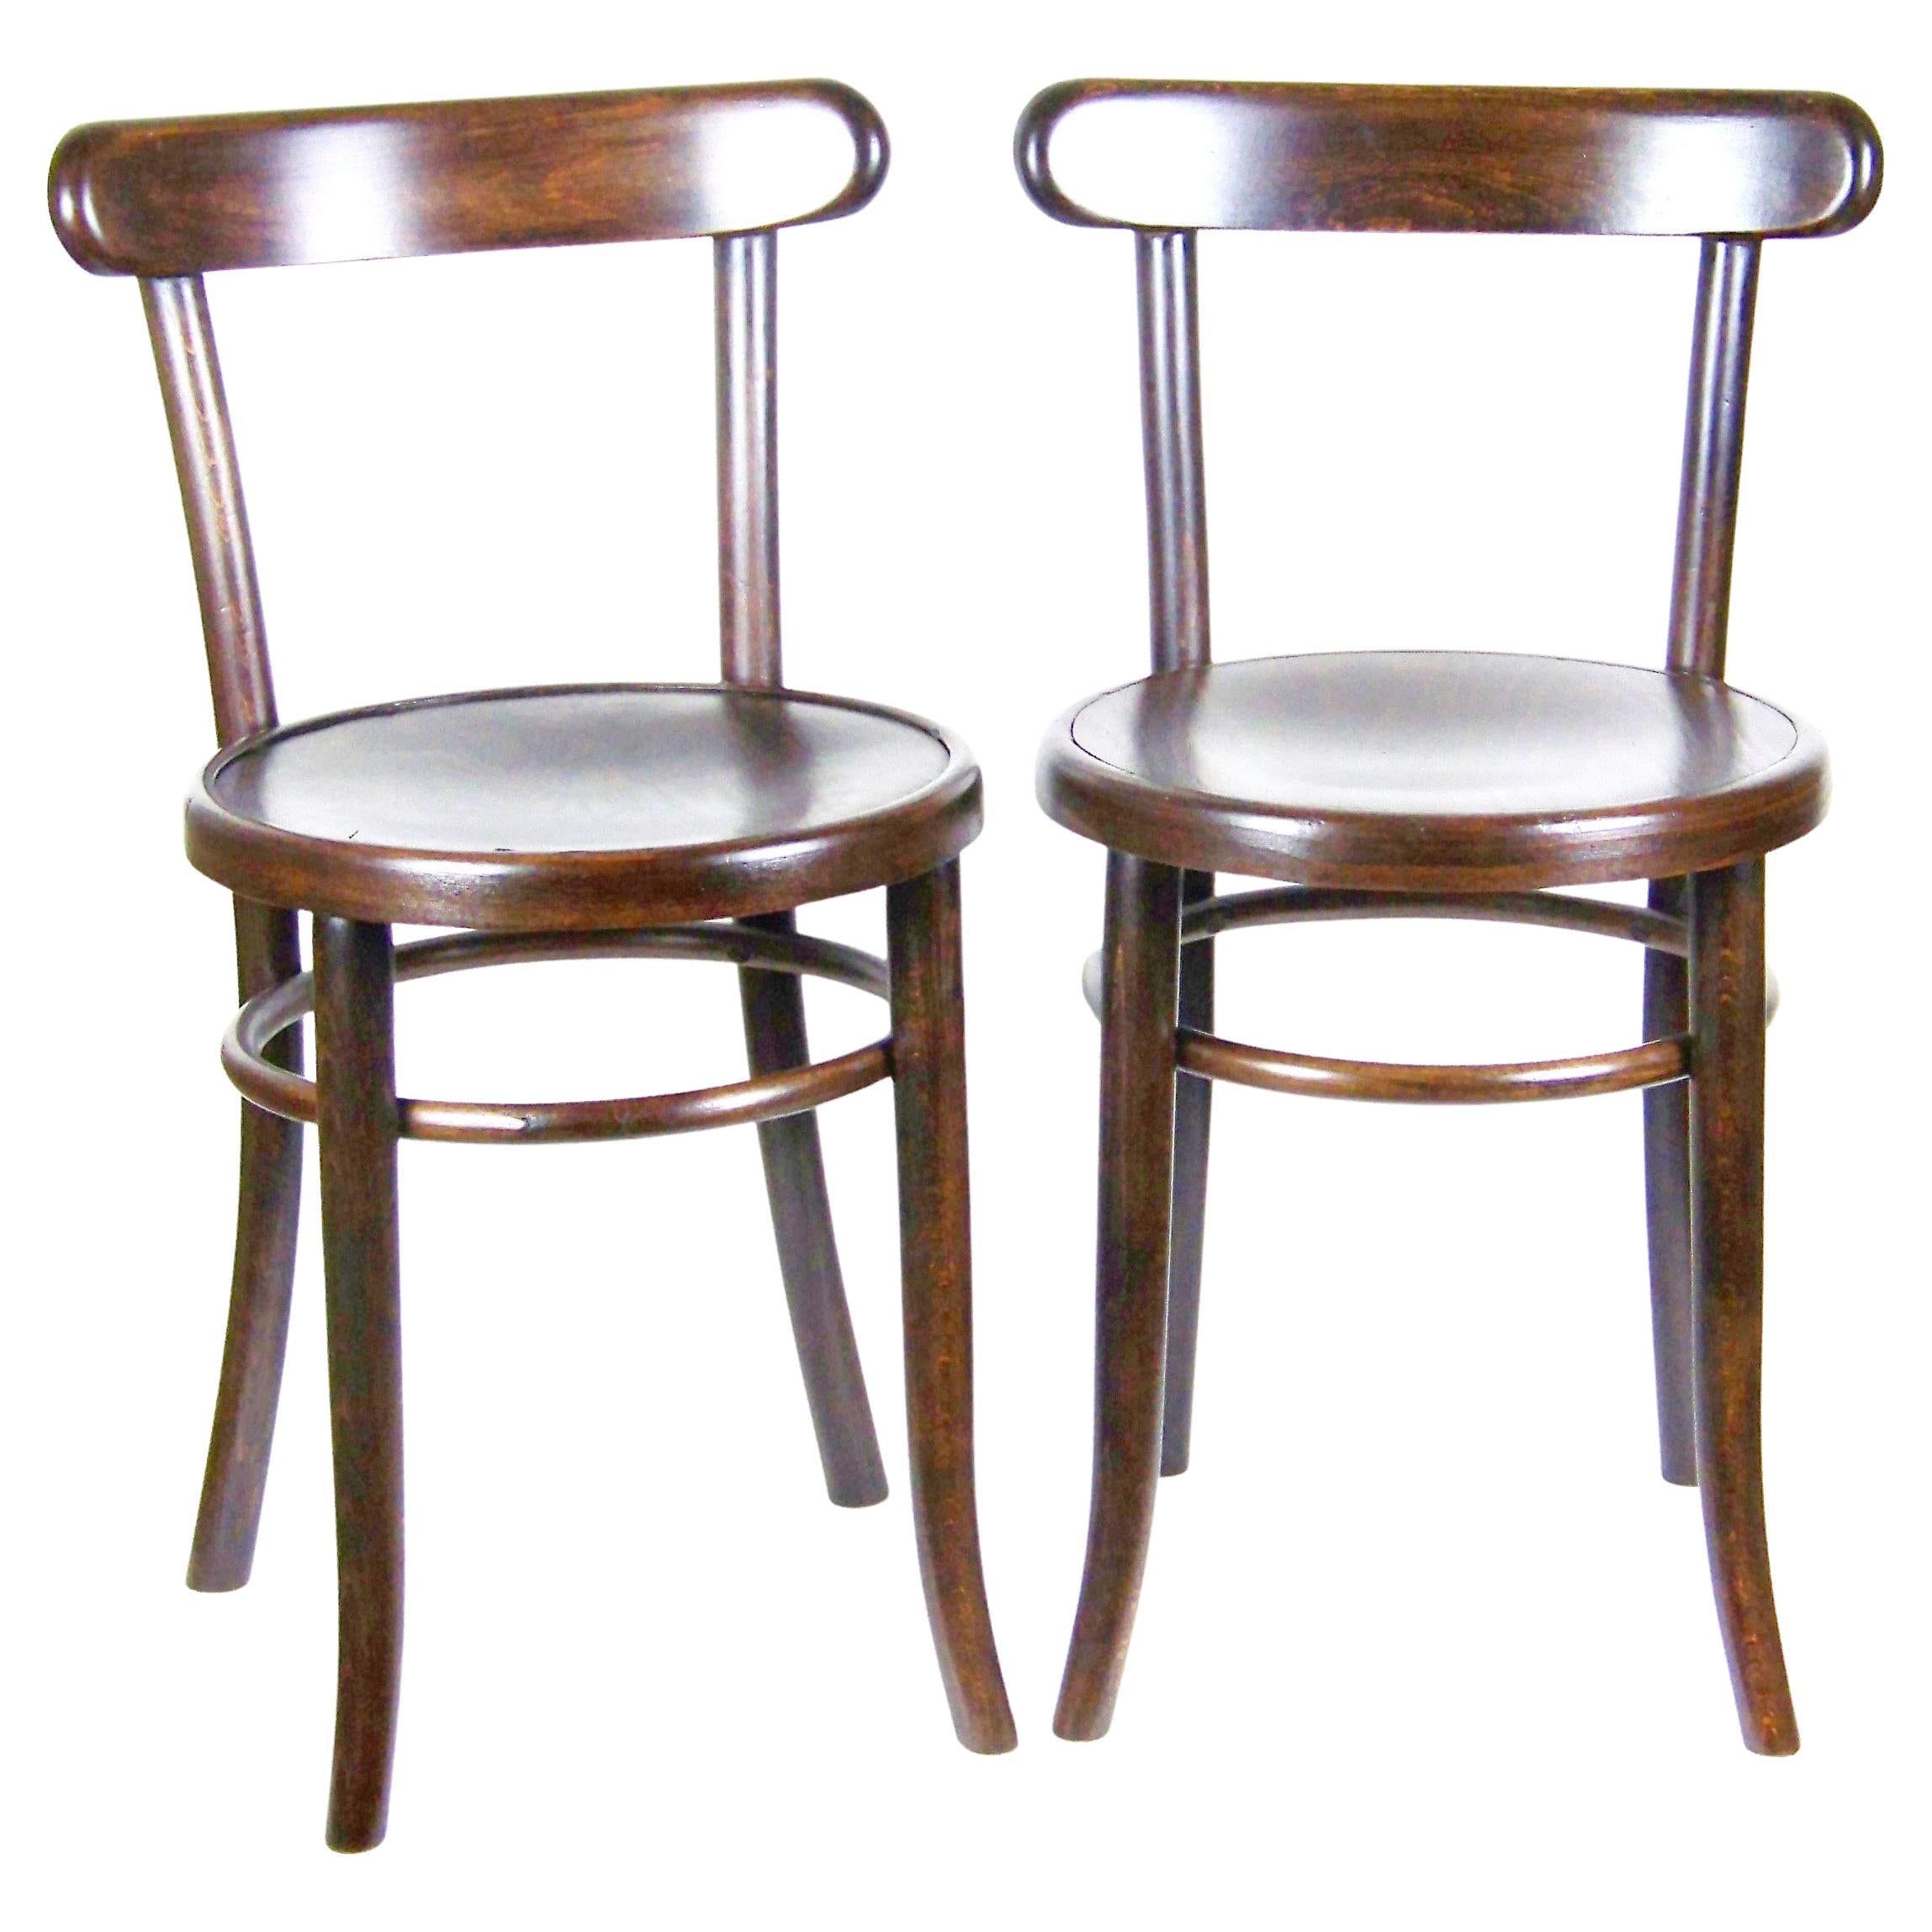 Two Chairs Thonet A730, since 1927